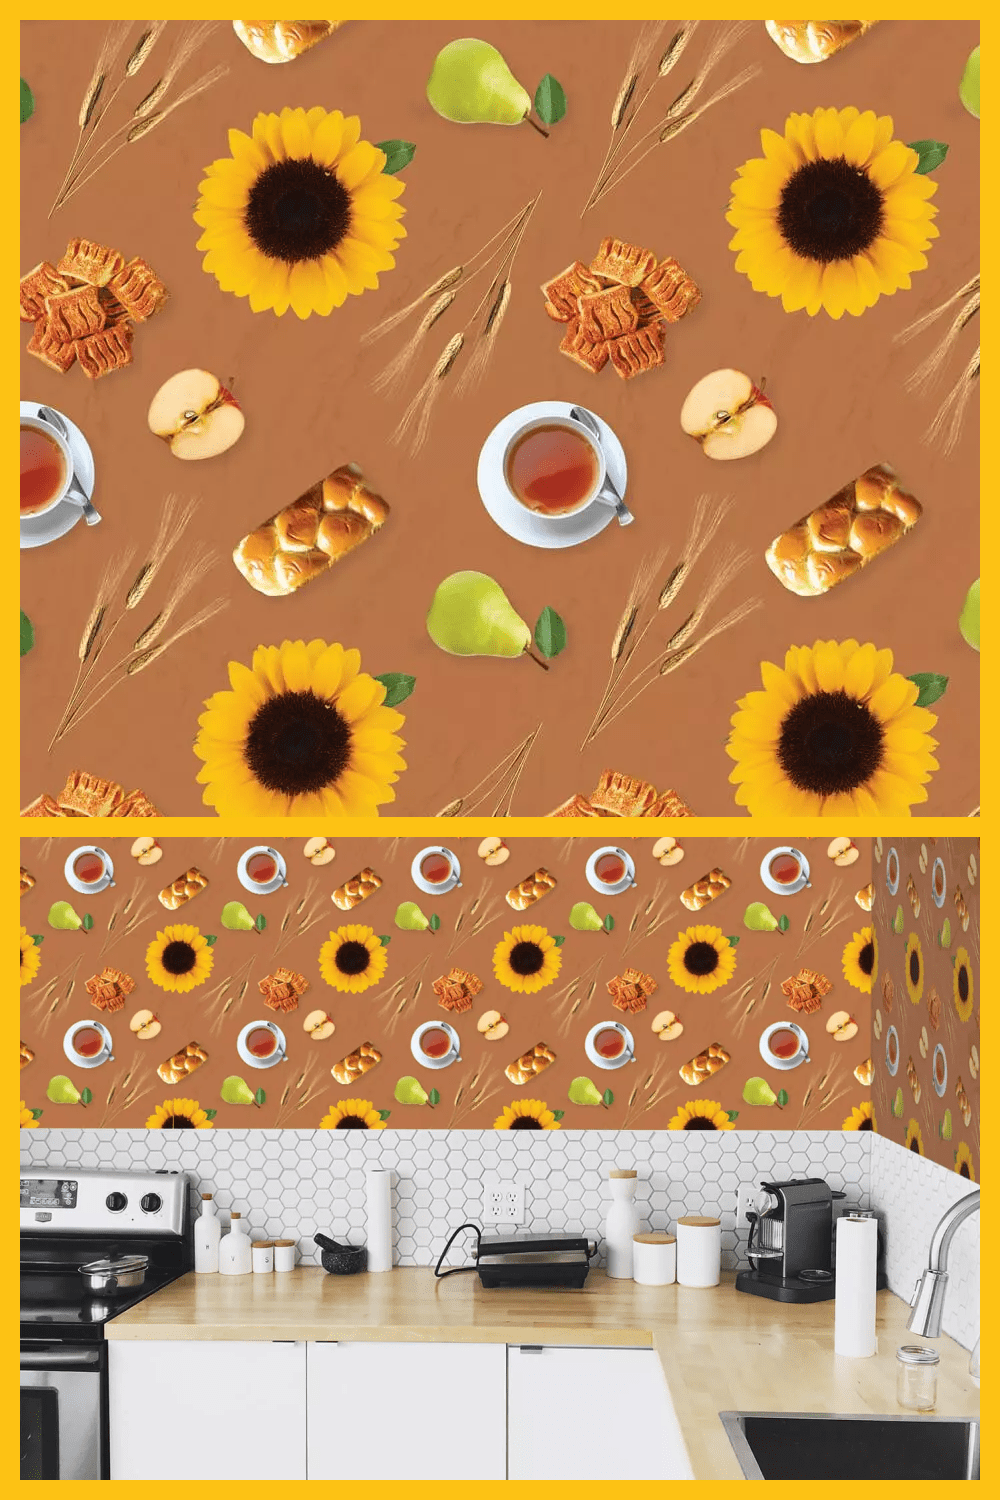 Sunflowers, a cup of tea, a goose, an apple, a bun on the wallpaper on the kitchen wall.